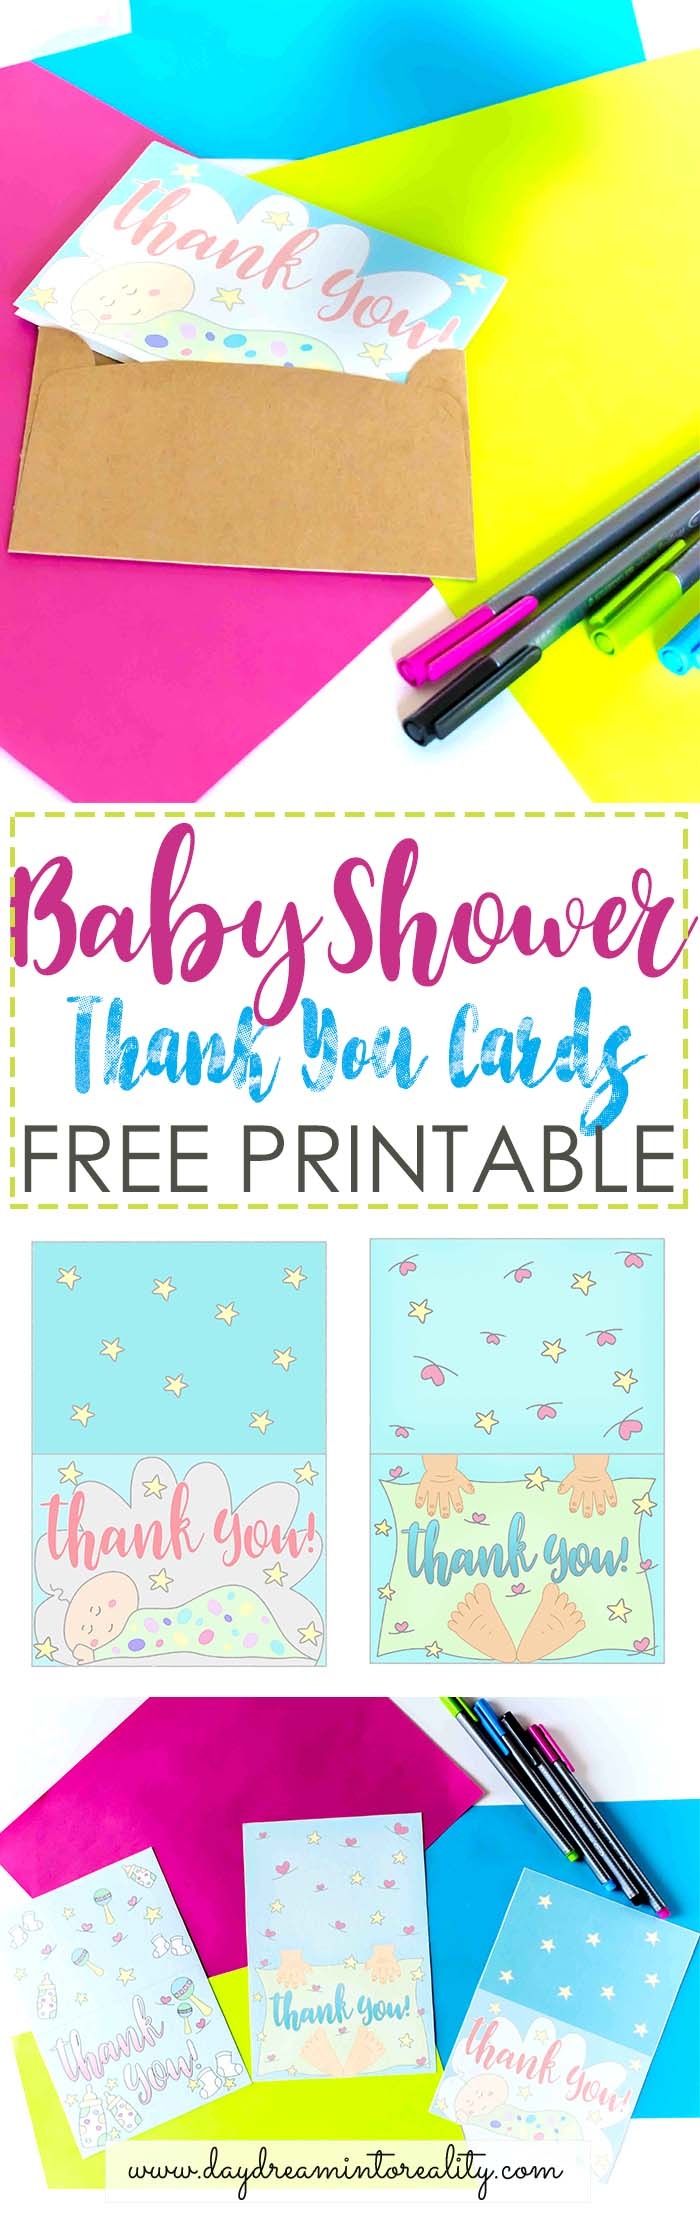 Baby Shower Thank You Cards Free Printable - Free Printable Baby Shower Thank You Cards